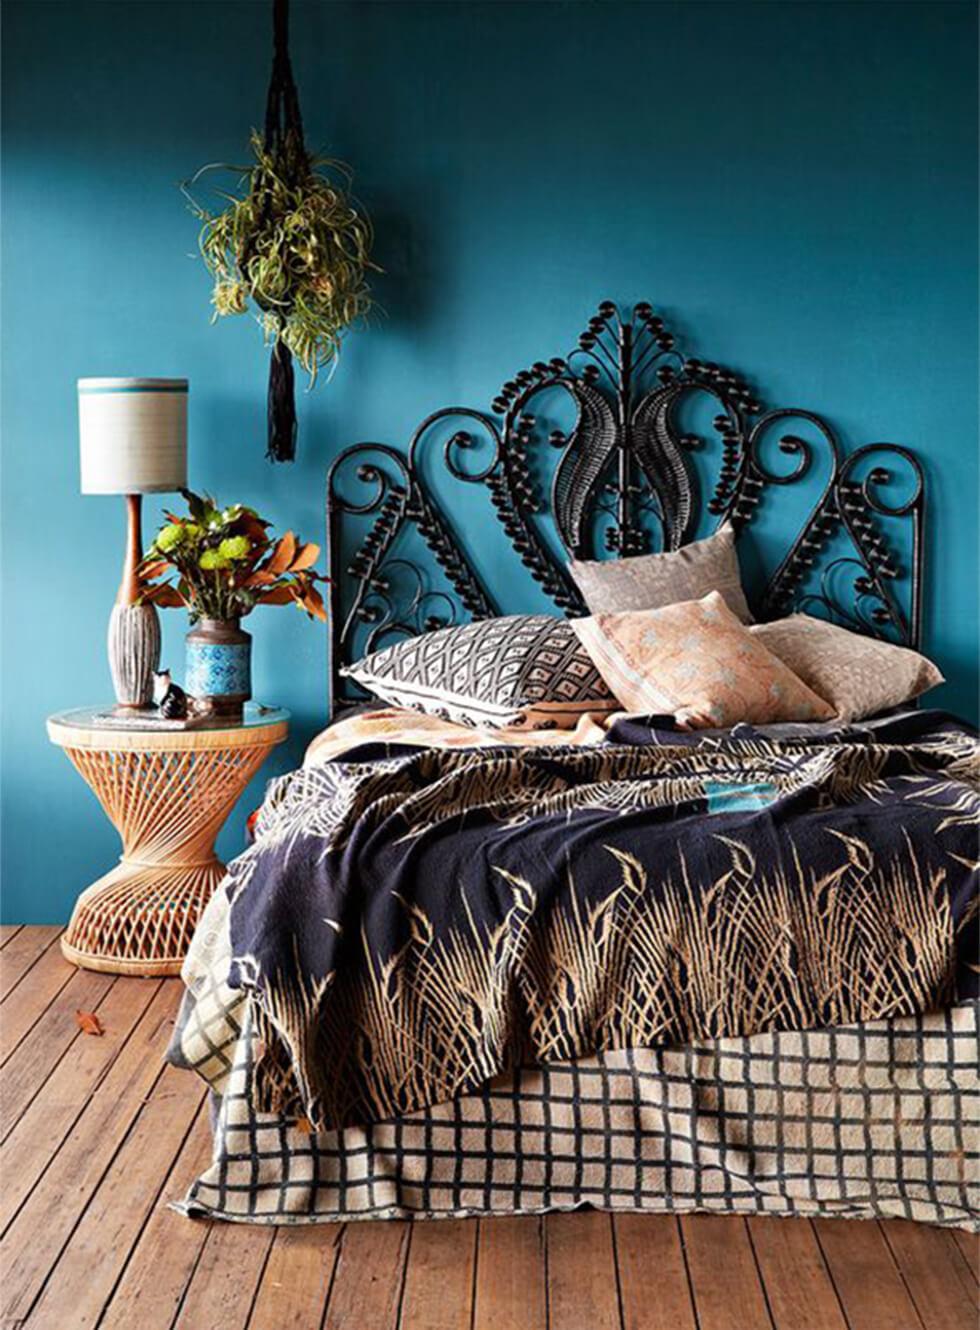 Teal bedroom with a rattan side table and ornate peacock rattan bed